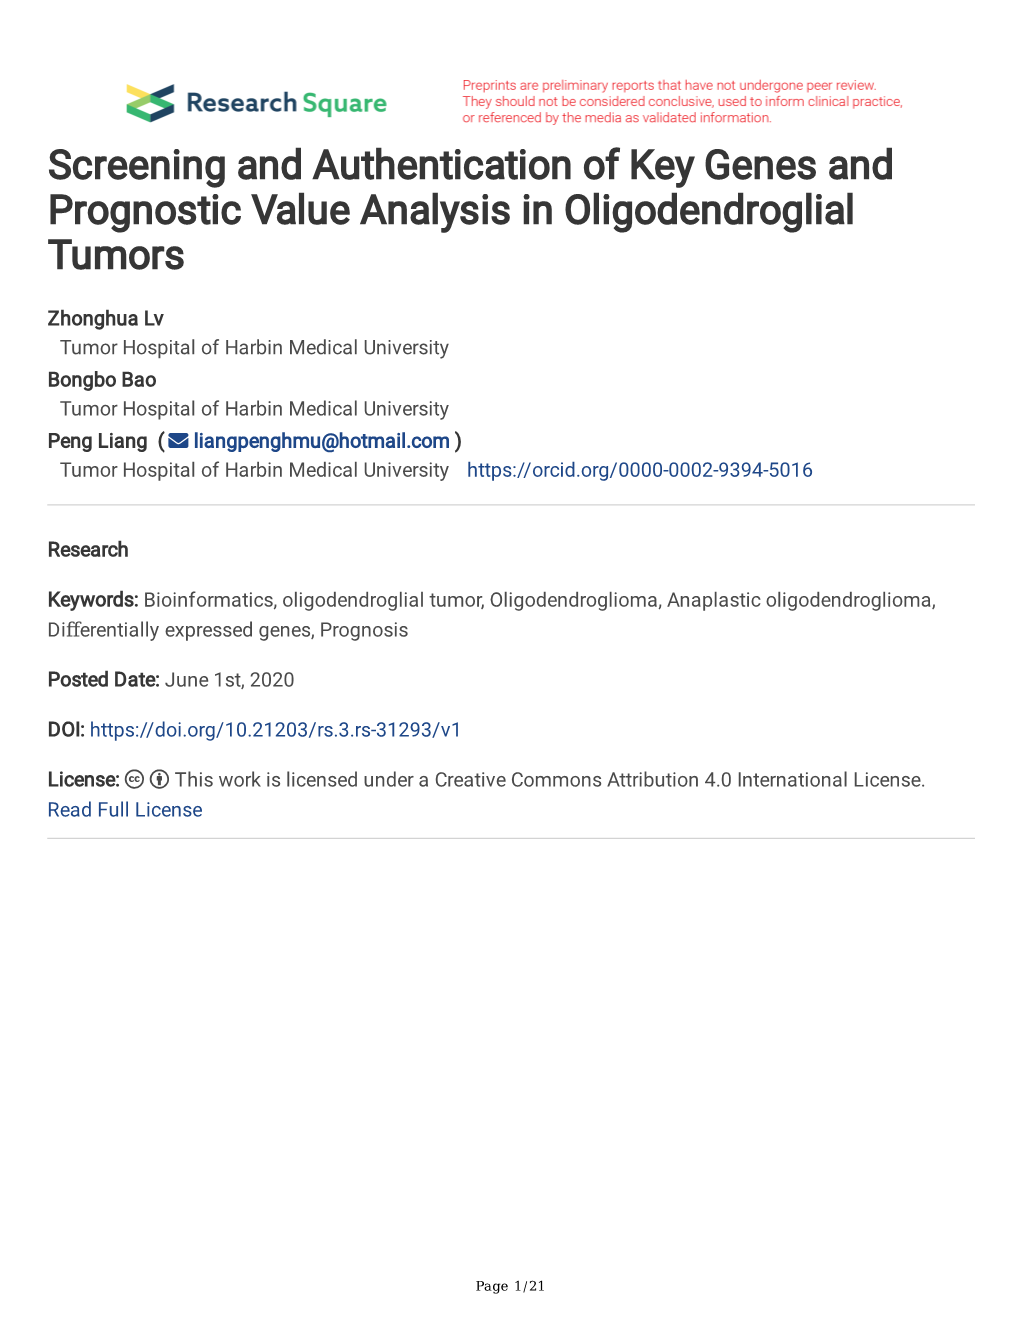 Screening and Authentication of Key Genes and Prognostic Value Analysis in Oligodendroglial Tumors